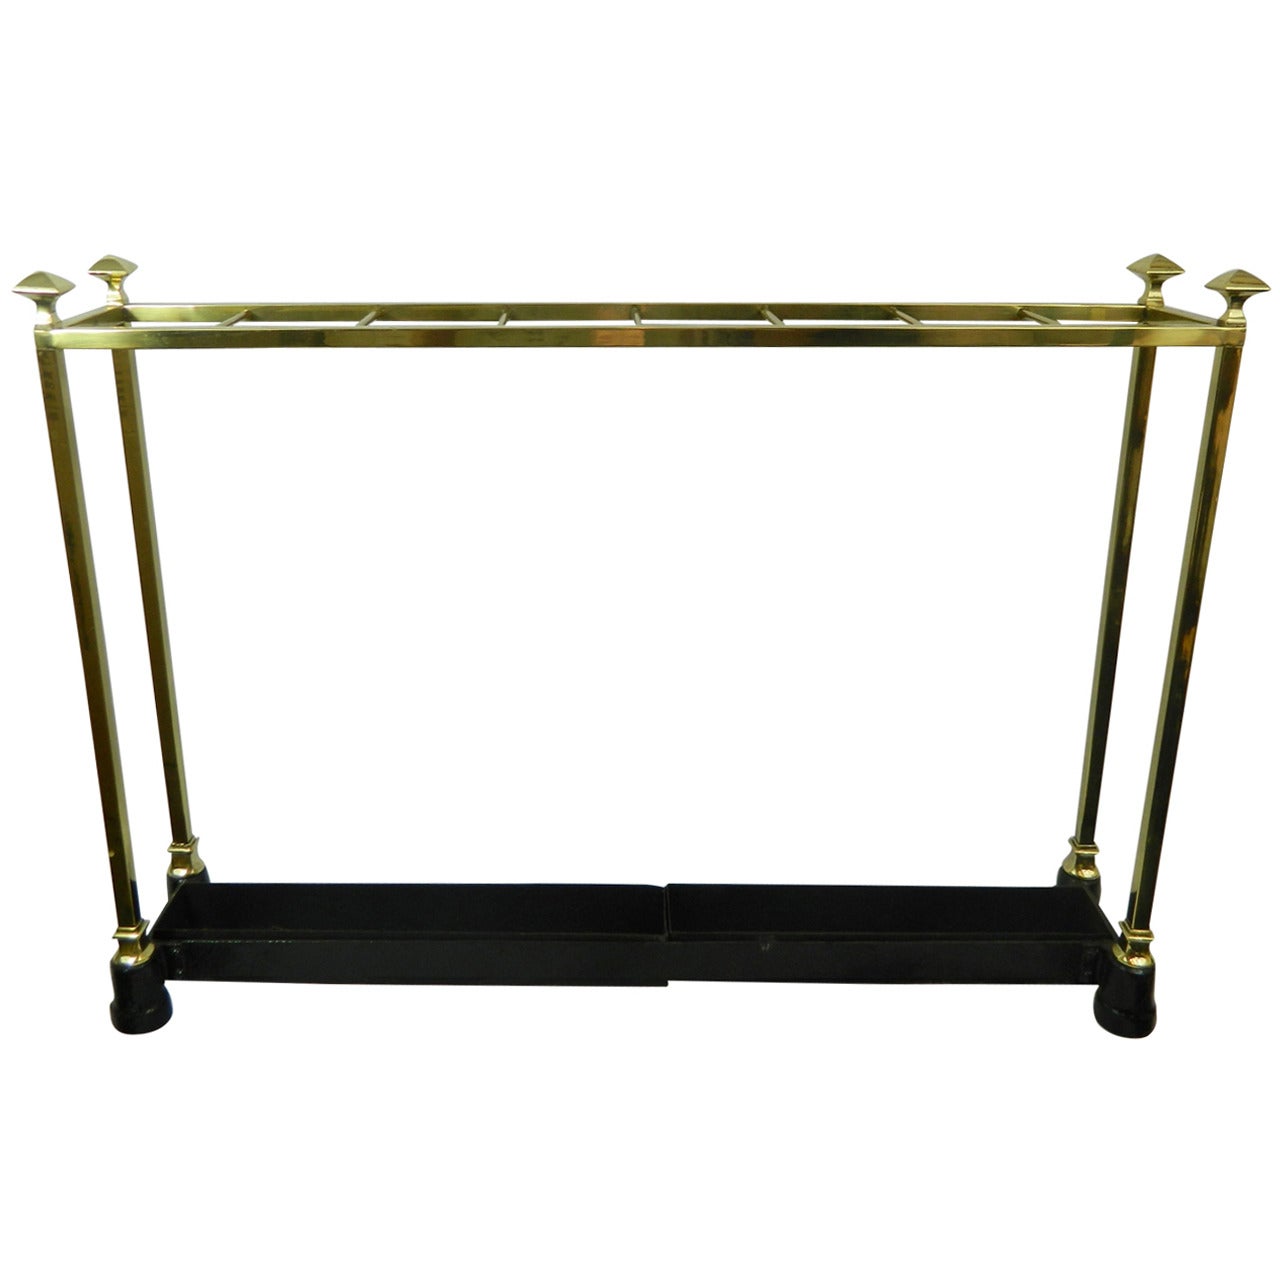 French Polished Brass and Iron Umbrella or Stick Stand, 19th Century